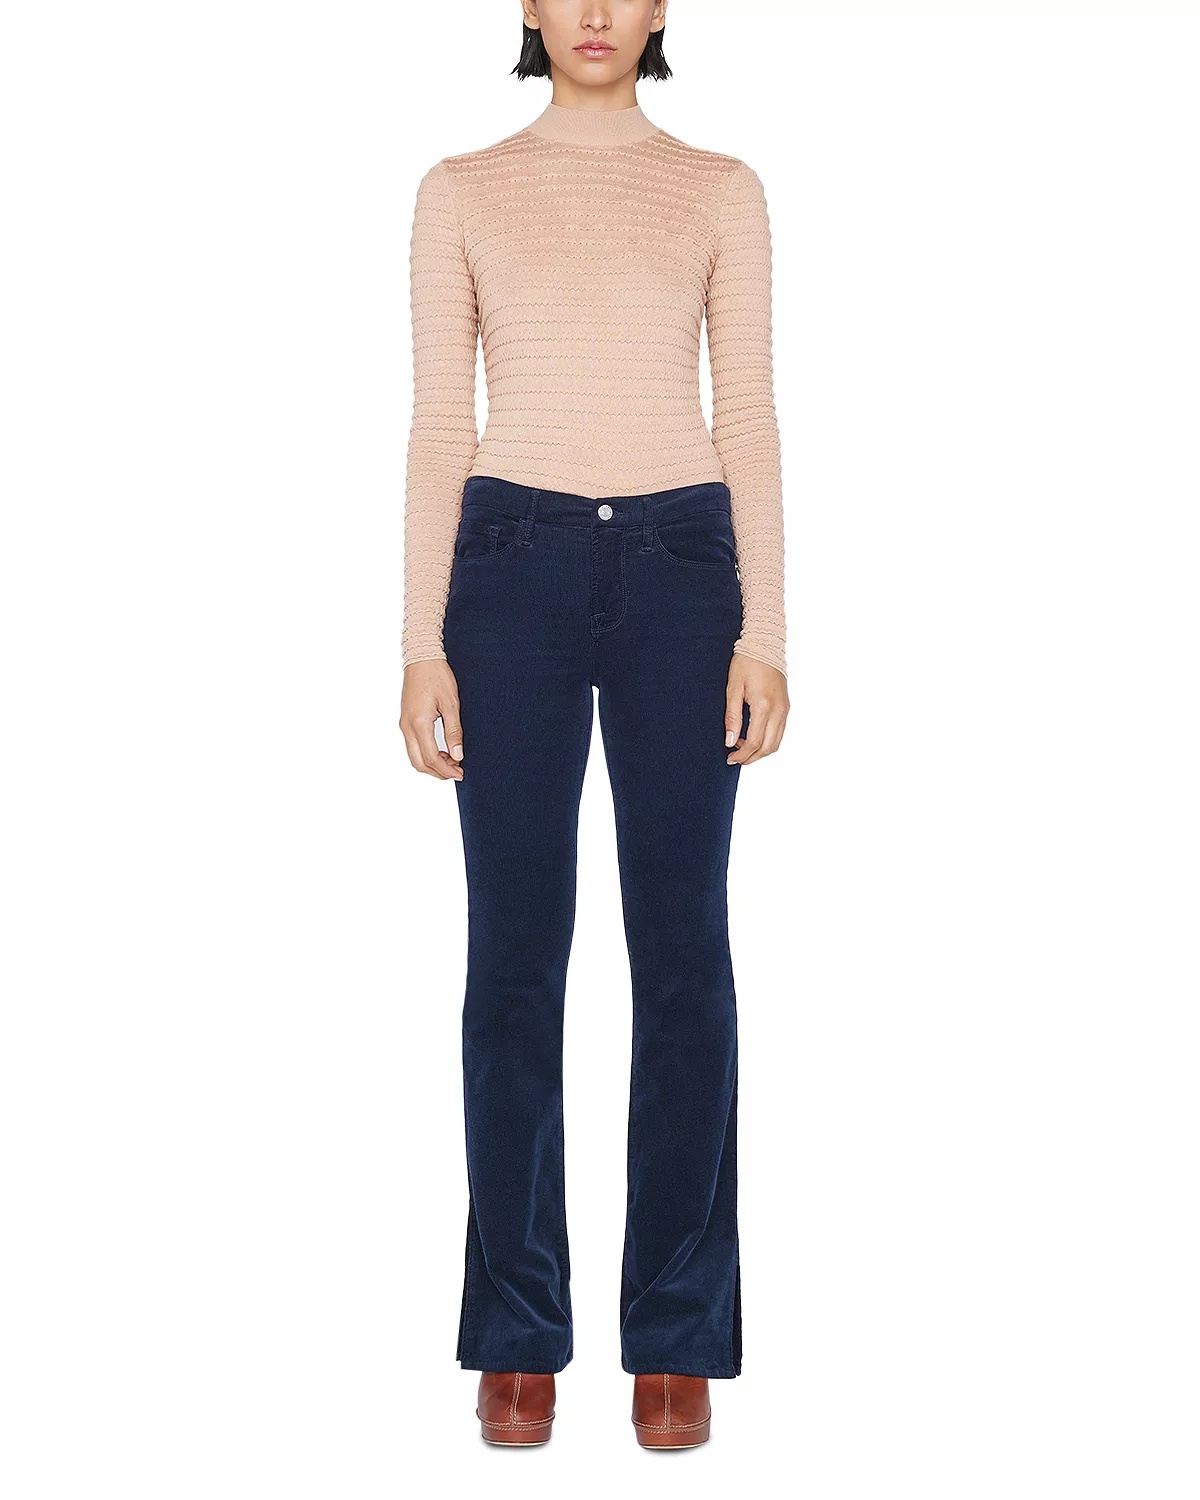 Le Mini High Rise Bootcut Jeans in Navy - 7